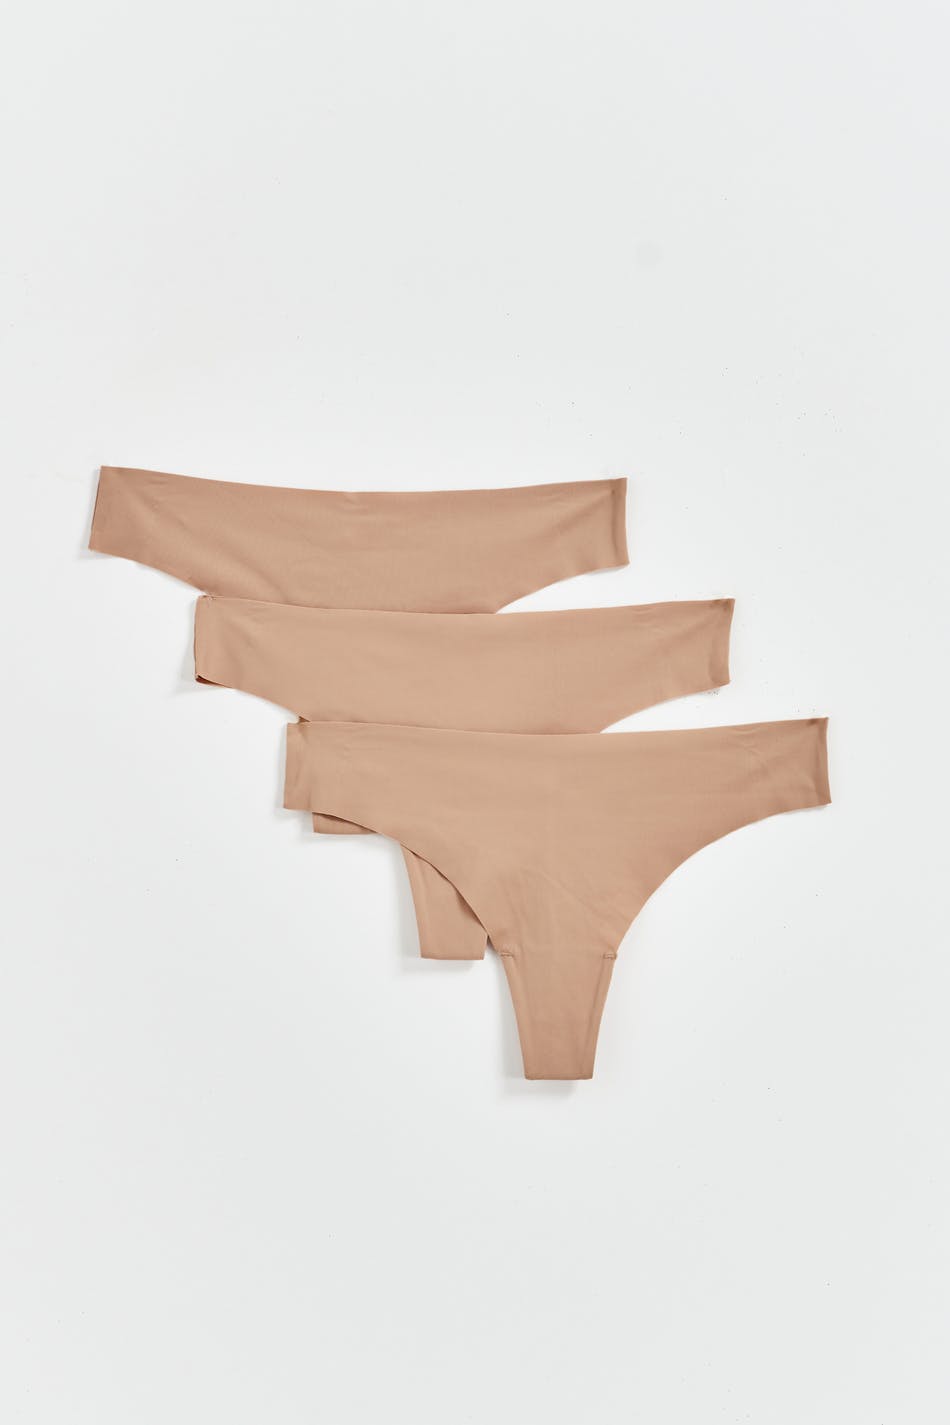 Gina Tricot - 3-pack invisible thong - trosor-3-pack - Beige - M - Female